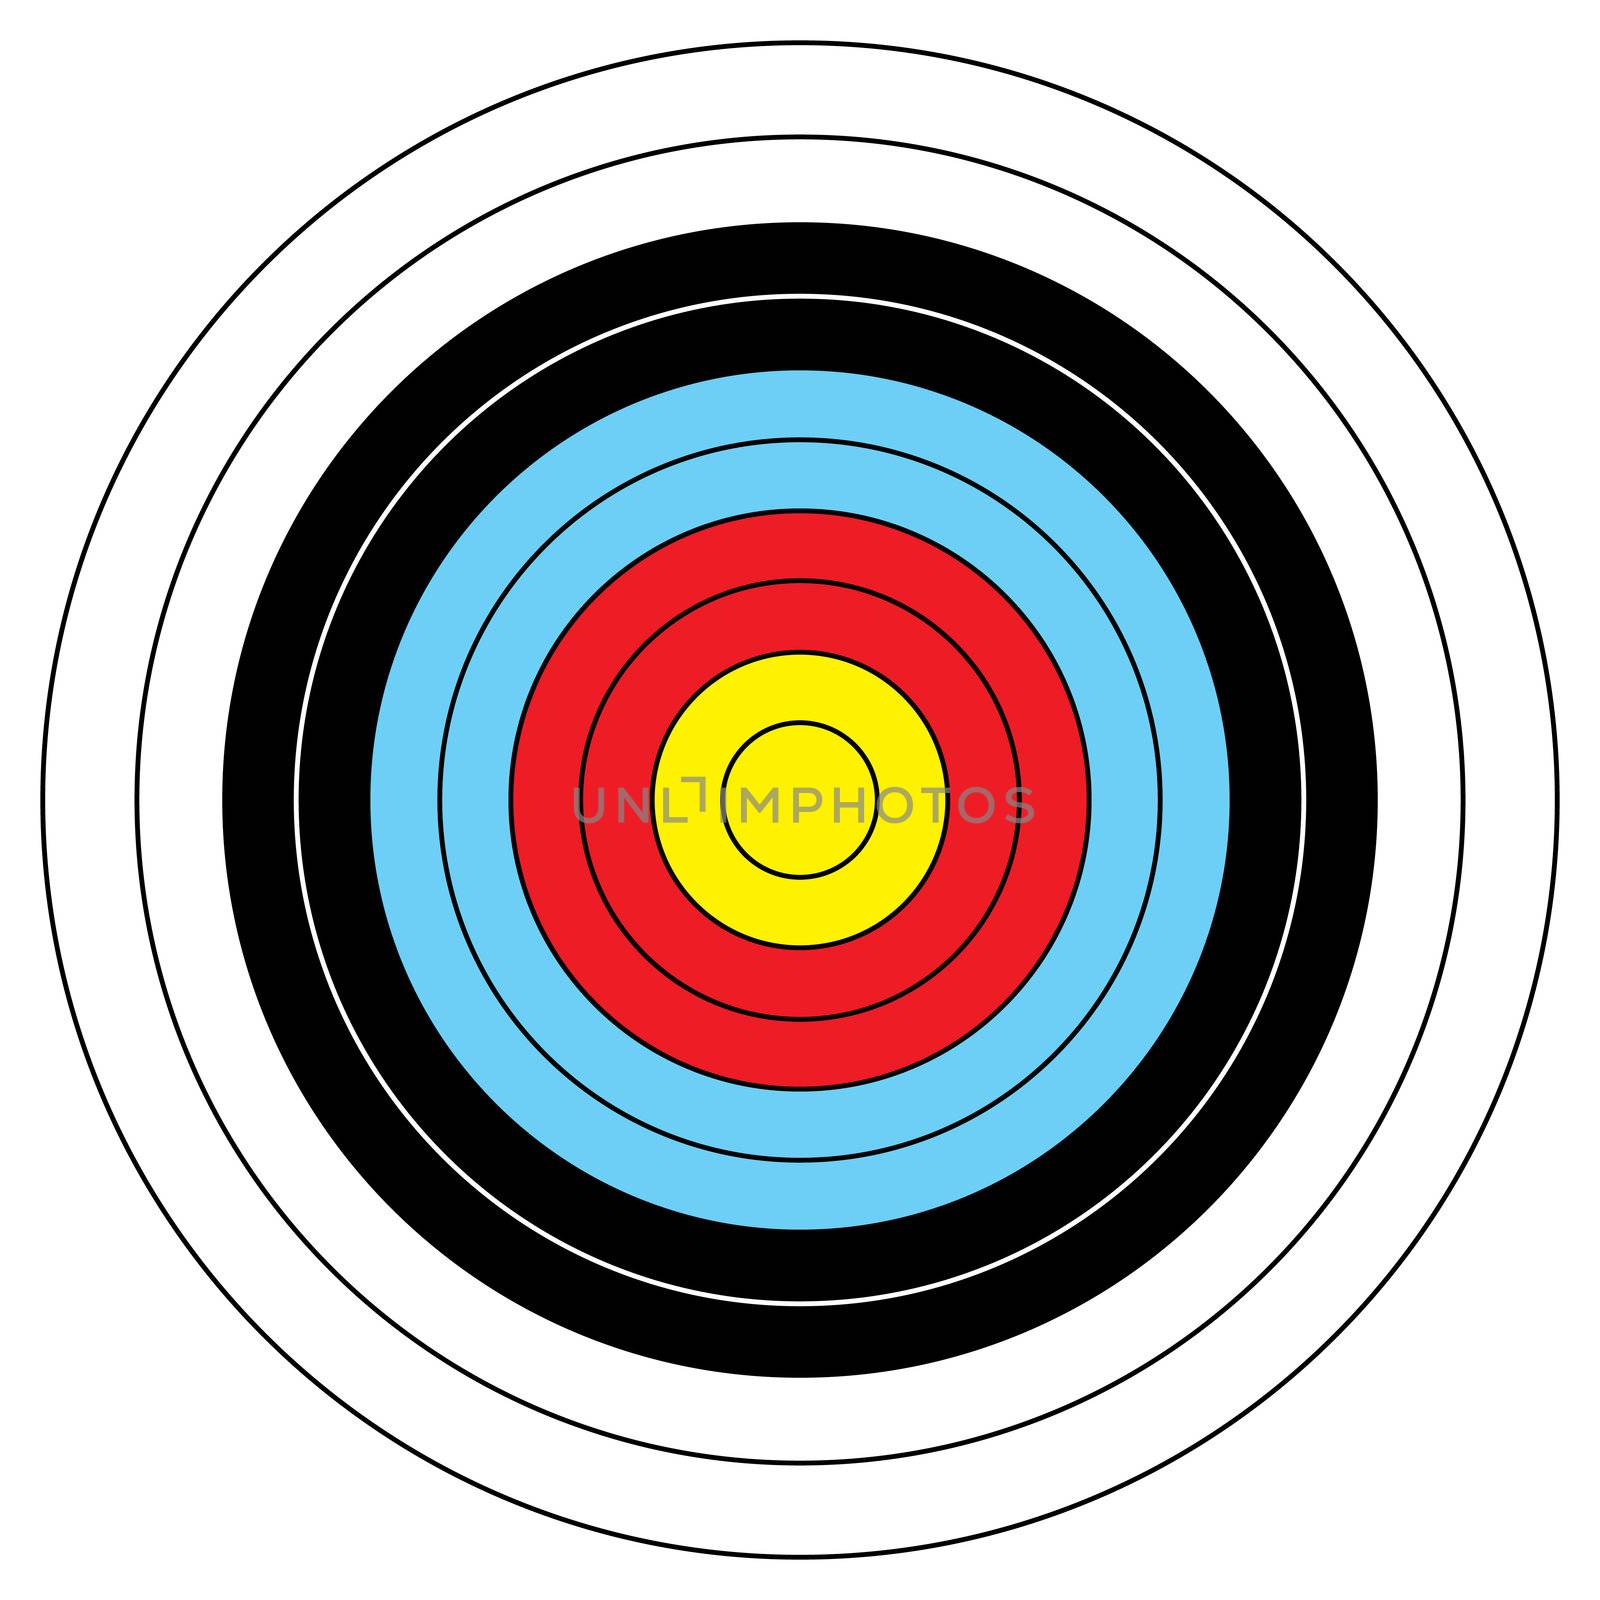 Illustrated archery target icon with colored bands and outline